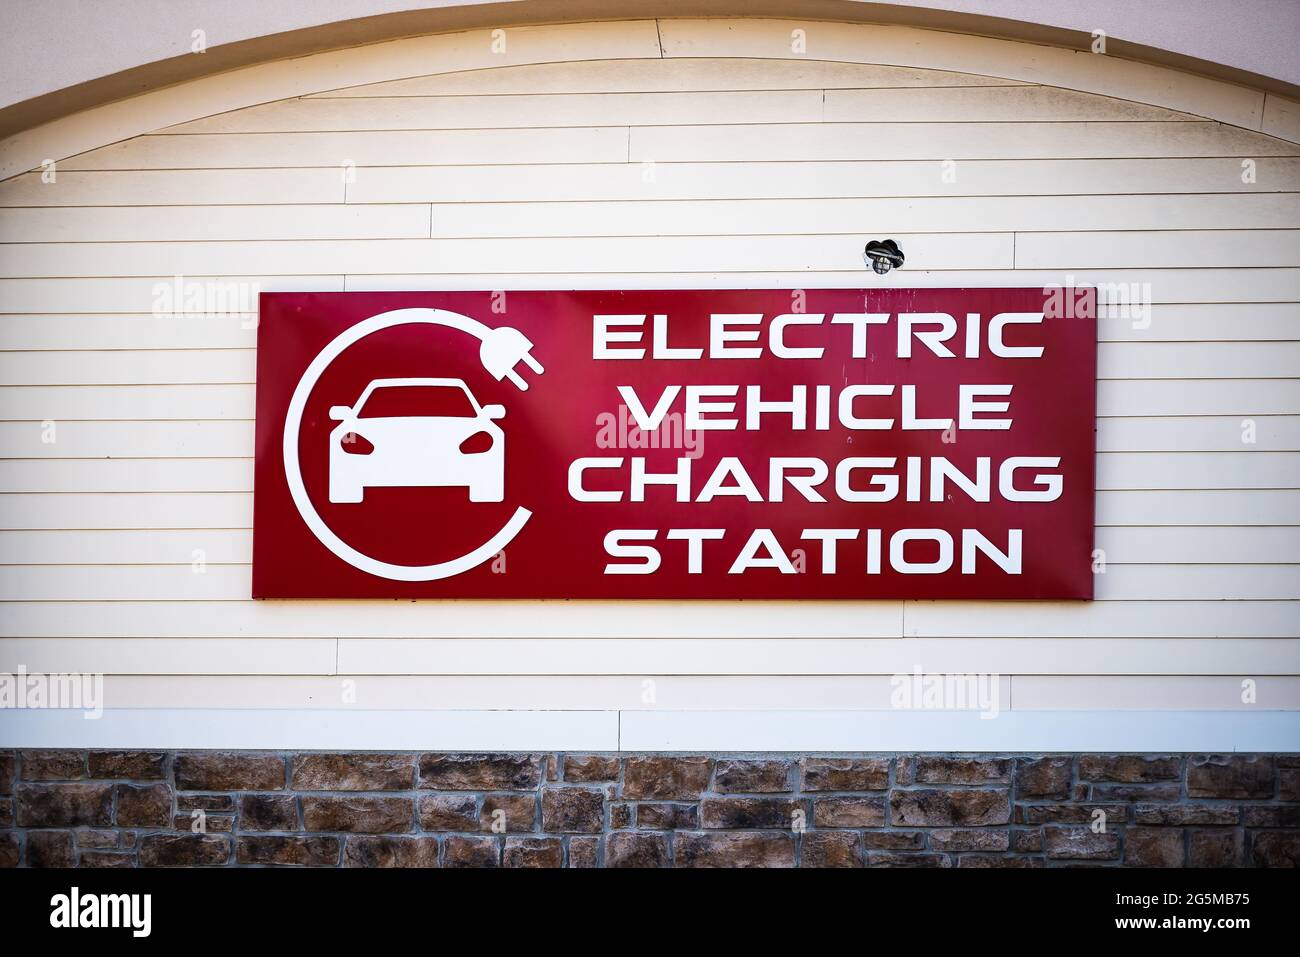 Sign on street road for Electric Vehicle Charging station with logo on building in Riverton Commons Plaza in Front Royal, Virginia USA Stock Photo